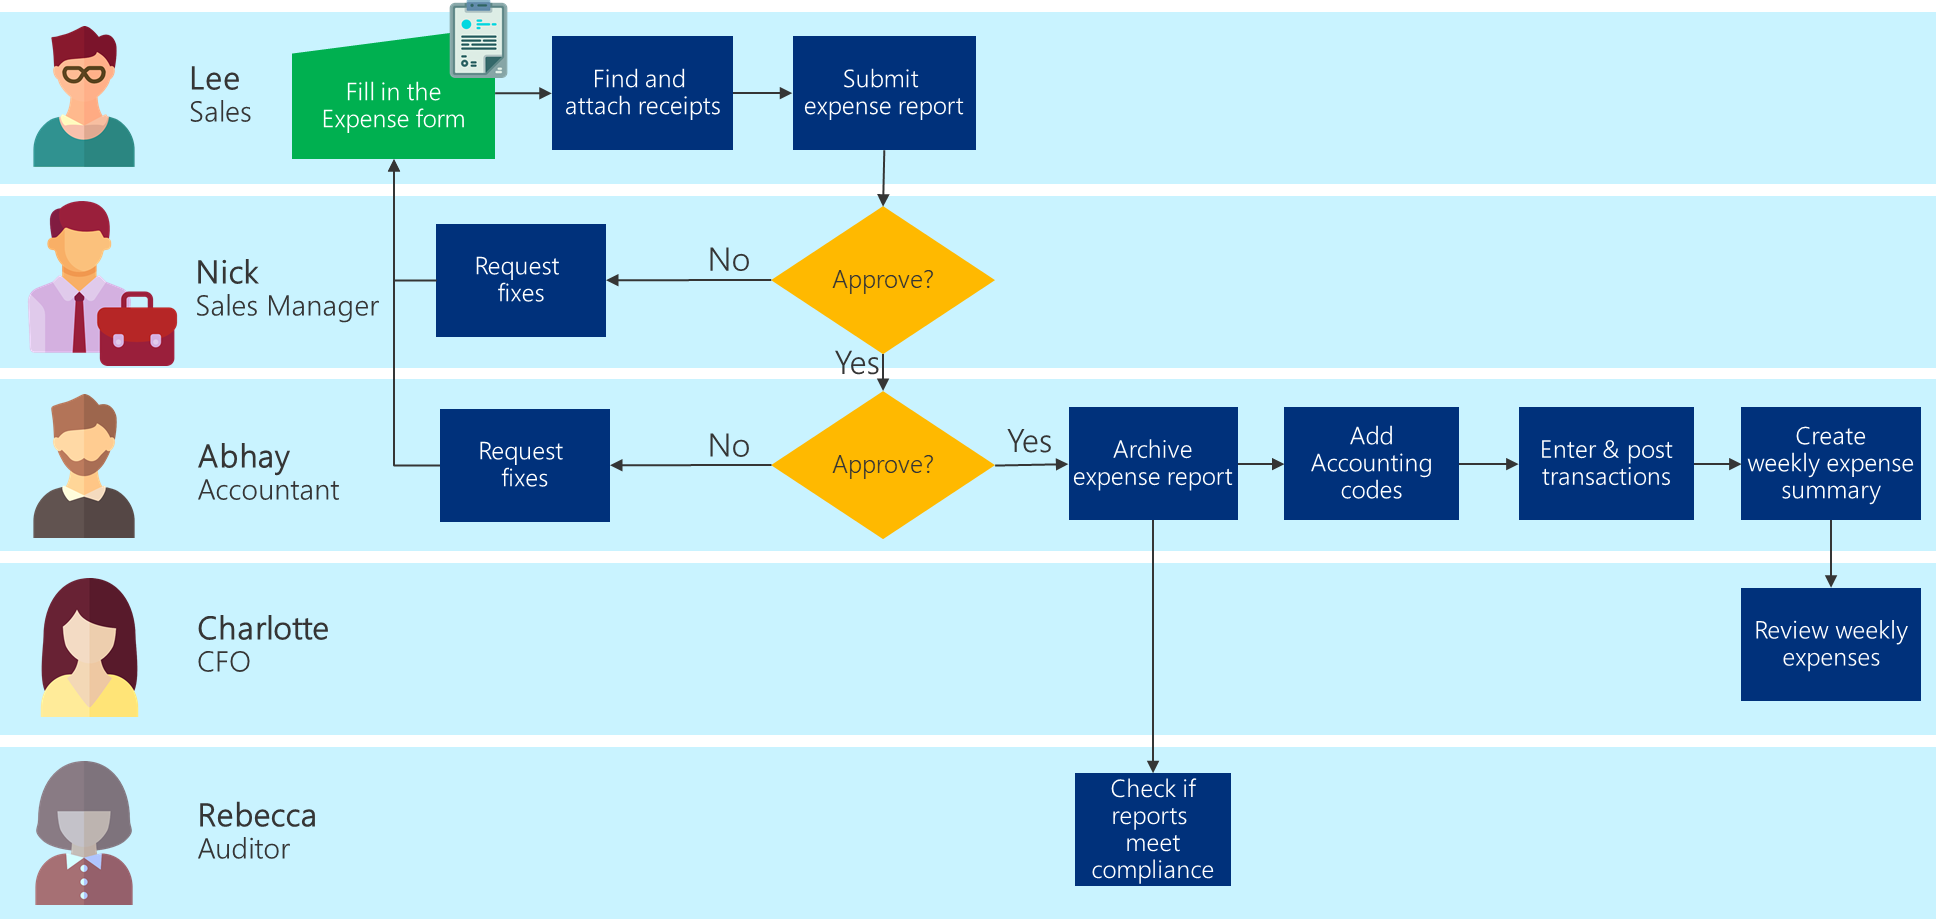 Example business process flowchart showing the steps of filling in the expense report, getting it approved, entering the data into the accounting system, and creating reports.